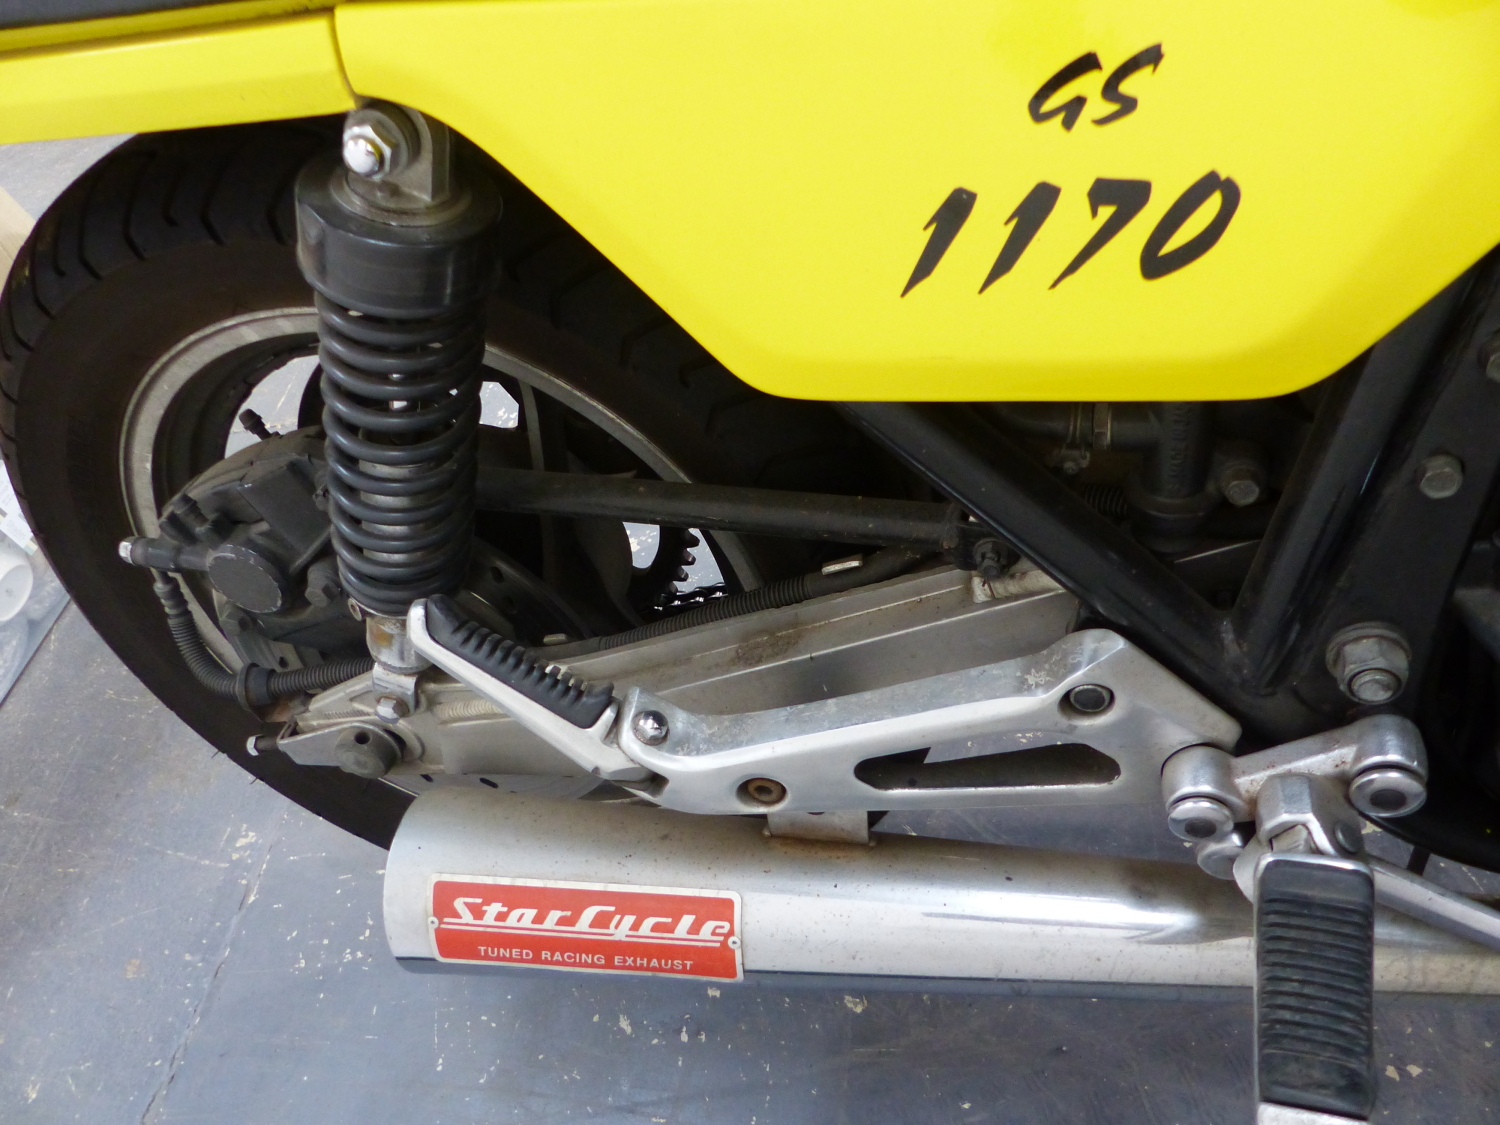 SUZUKI GSX1100E (1983) REG NO KEG 557Y GSX1100E- THIS CUSTOMISED 1983 GSX, SUPPLIED NEW ABROAD AND - Image 10 of 12